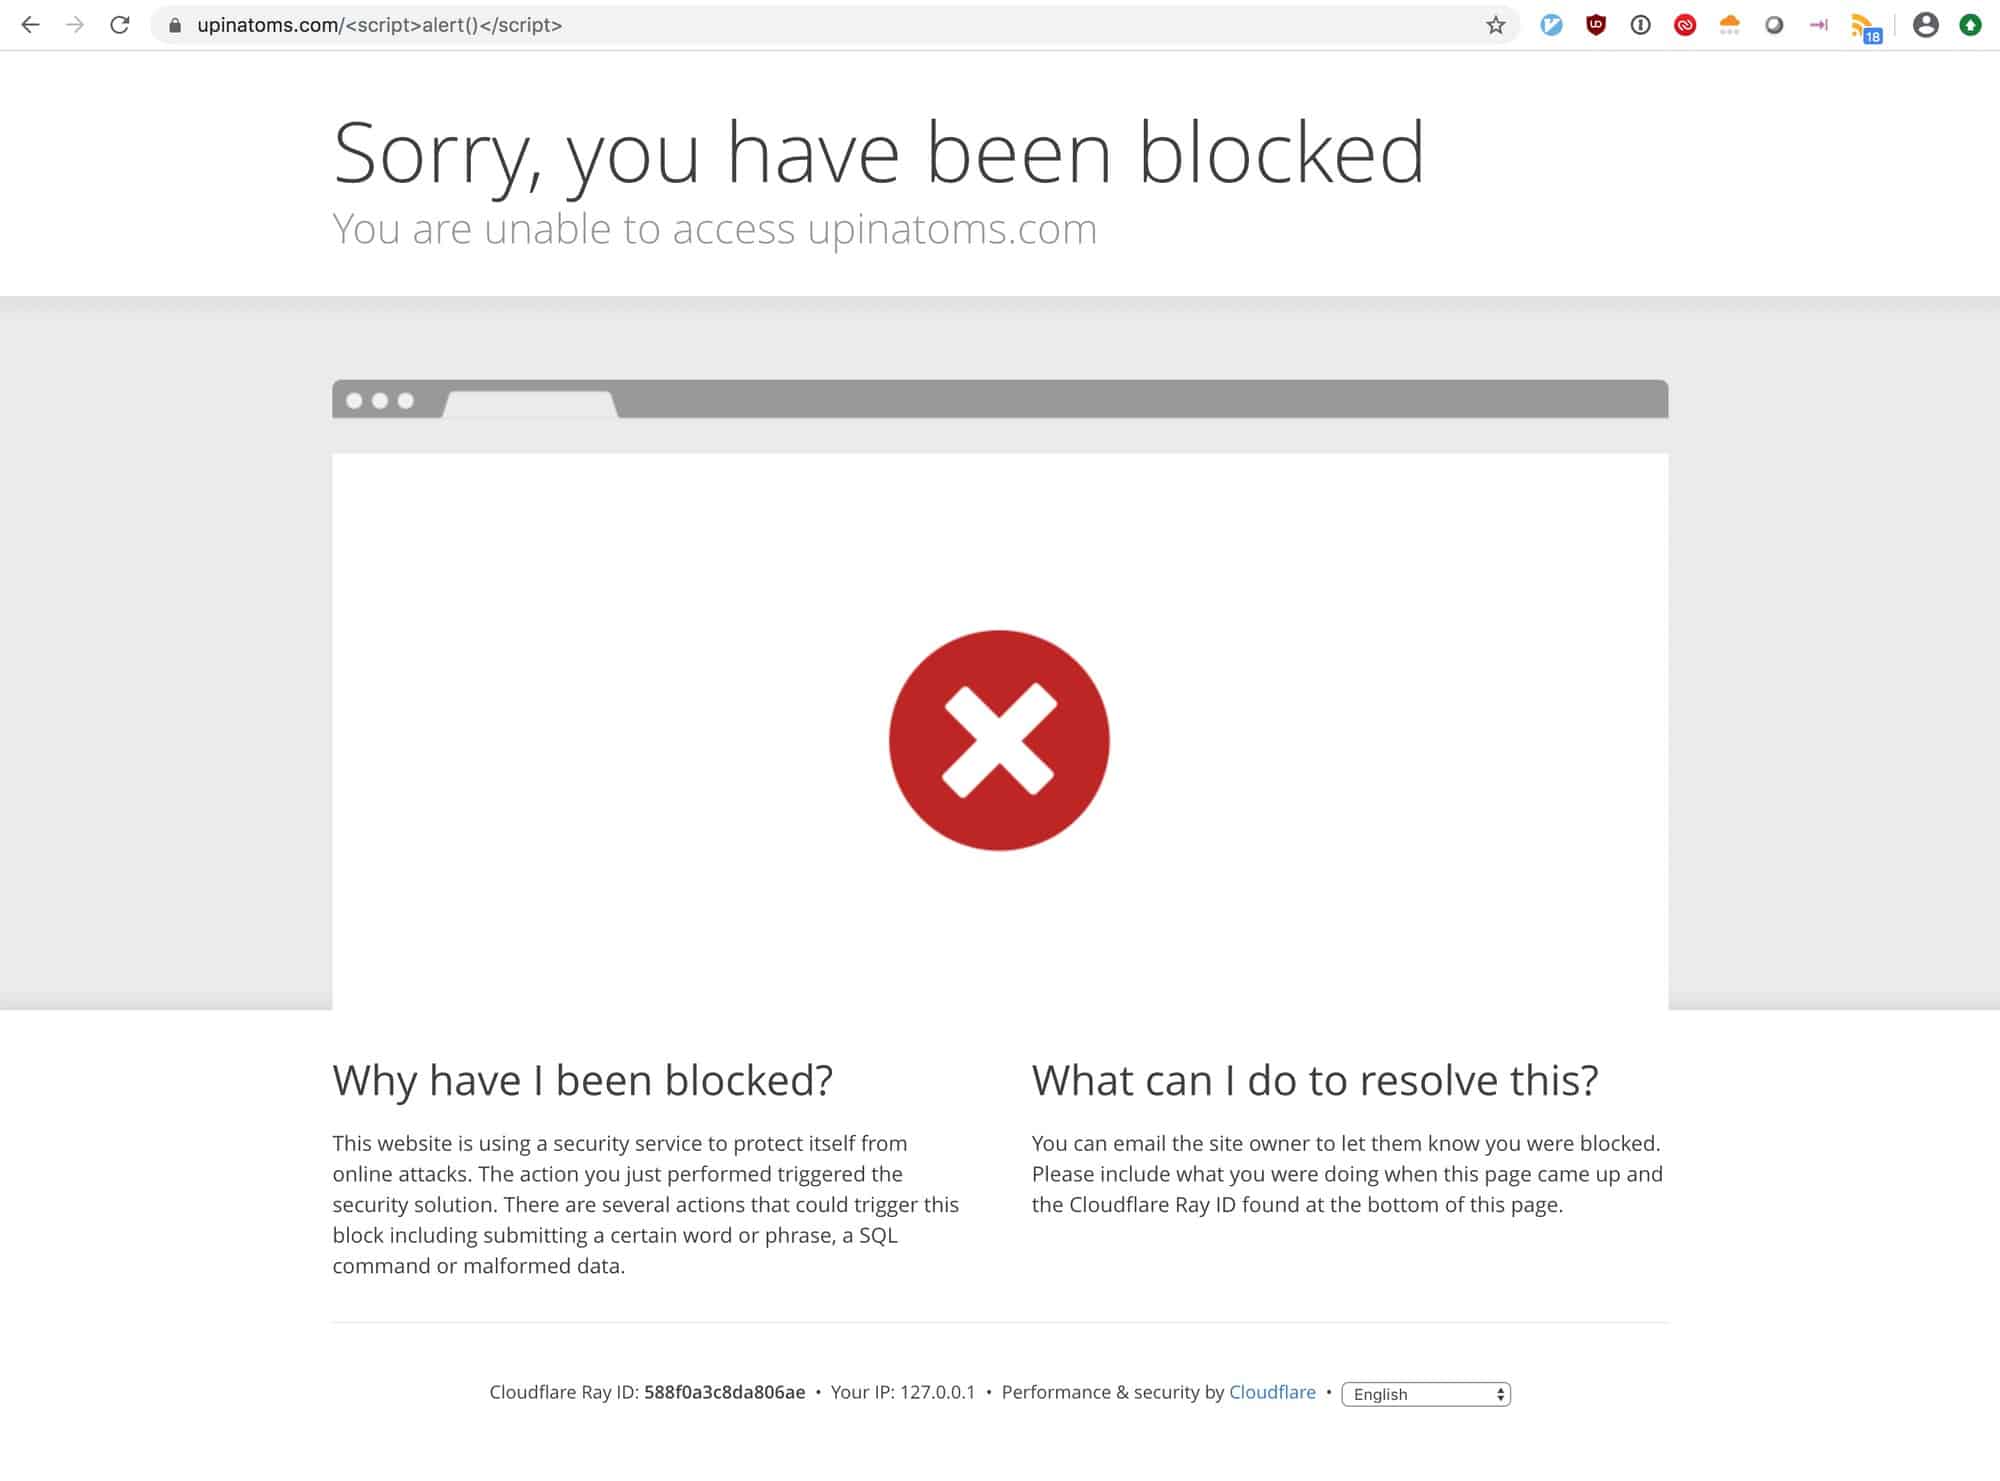 cloudflare block page